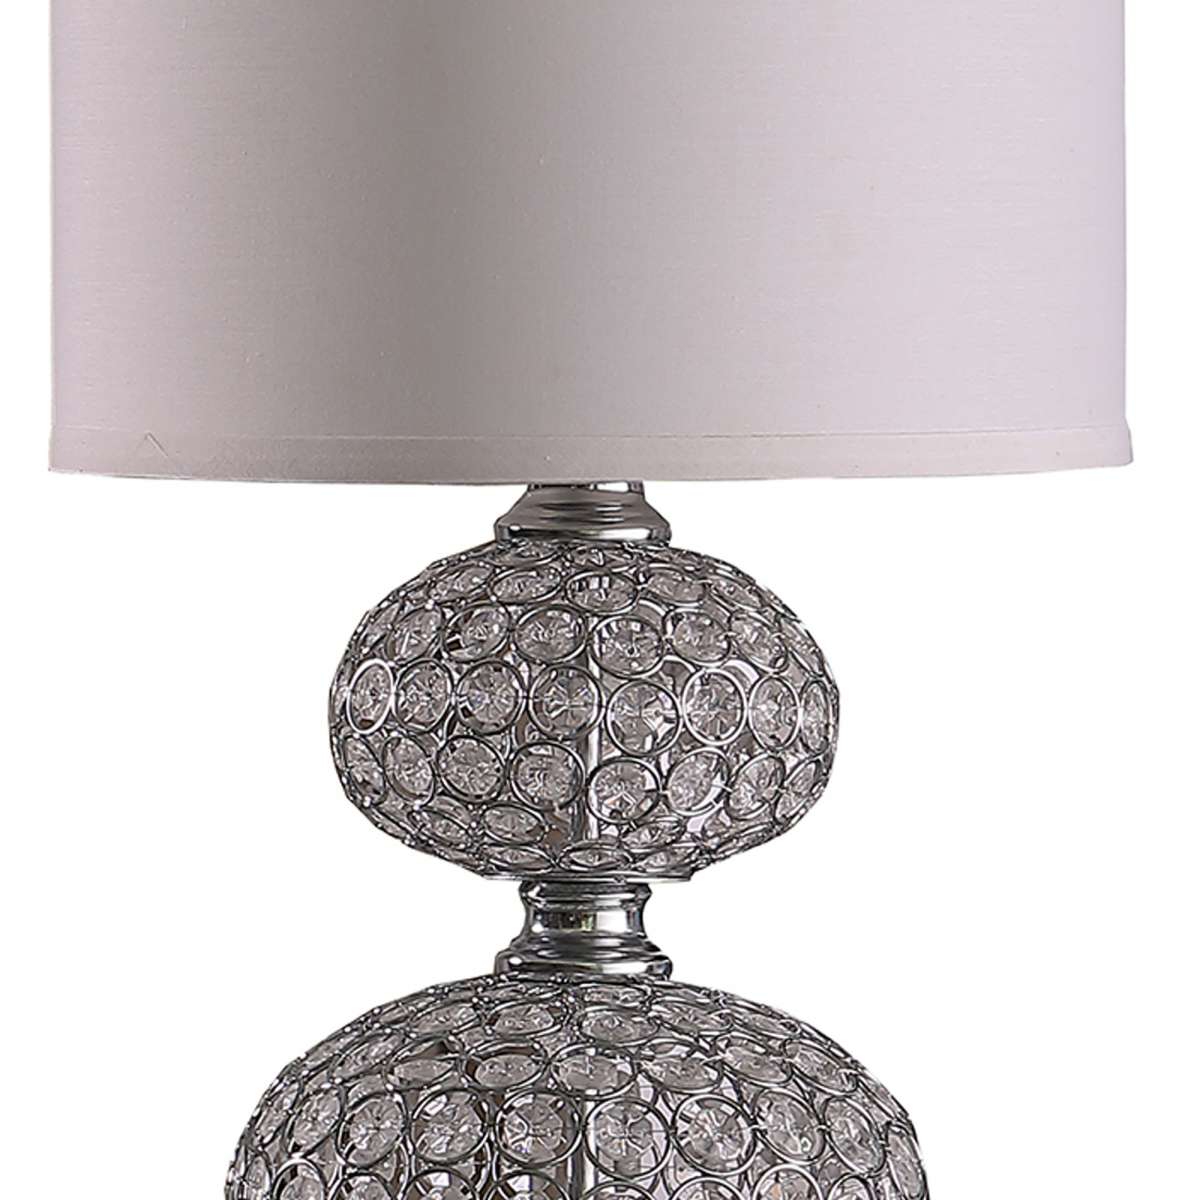 Stacked Ball Design Metal Table Lamp With Crystal Accents, Silver By Benzara